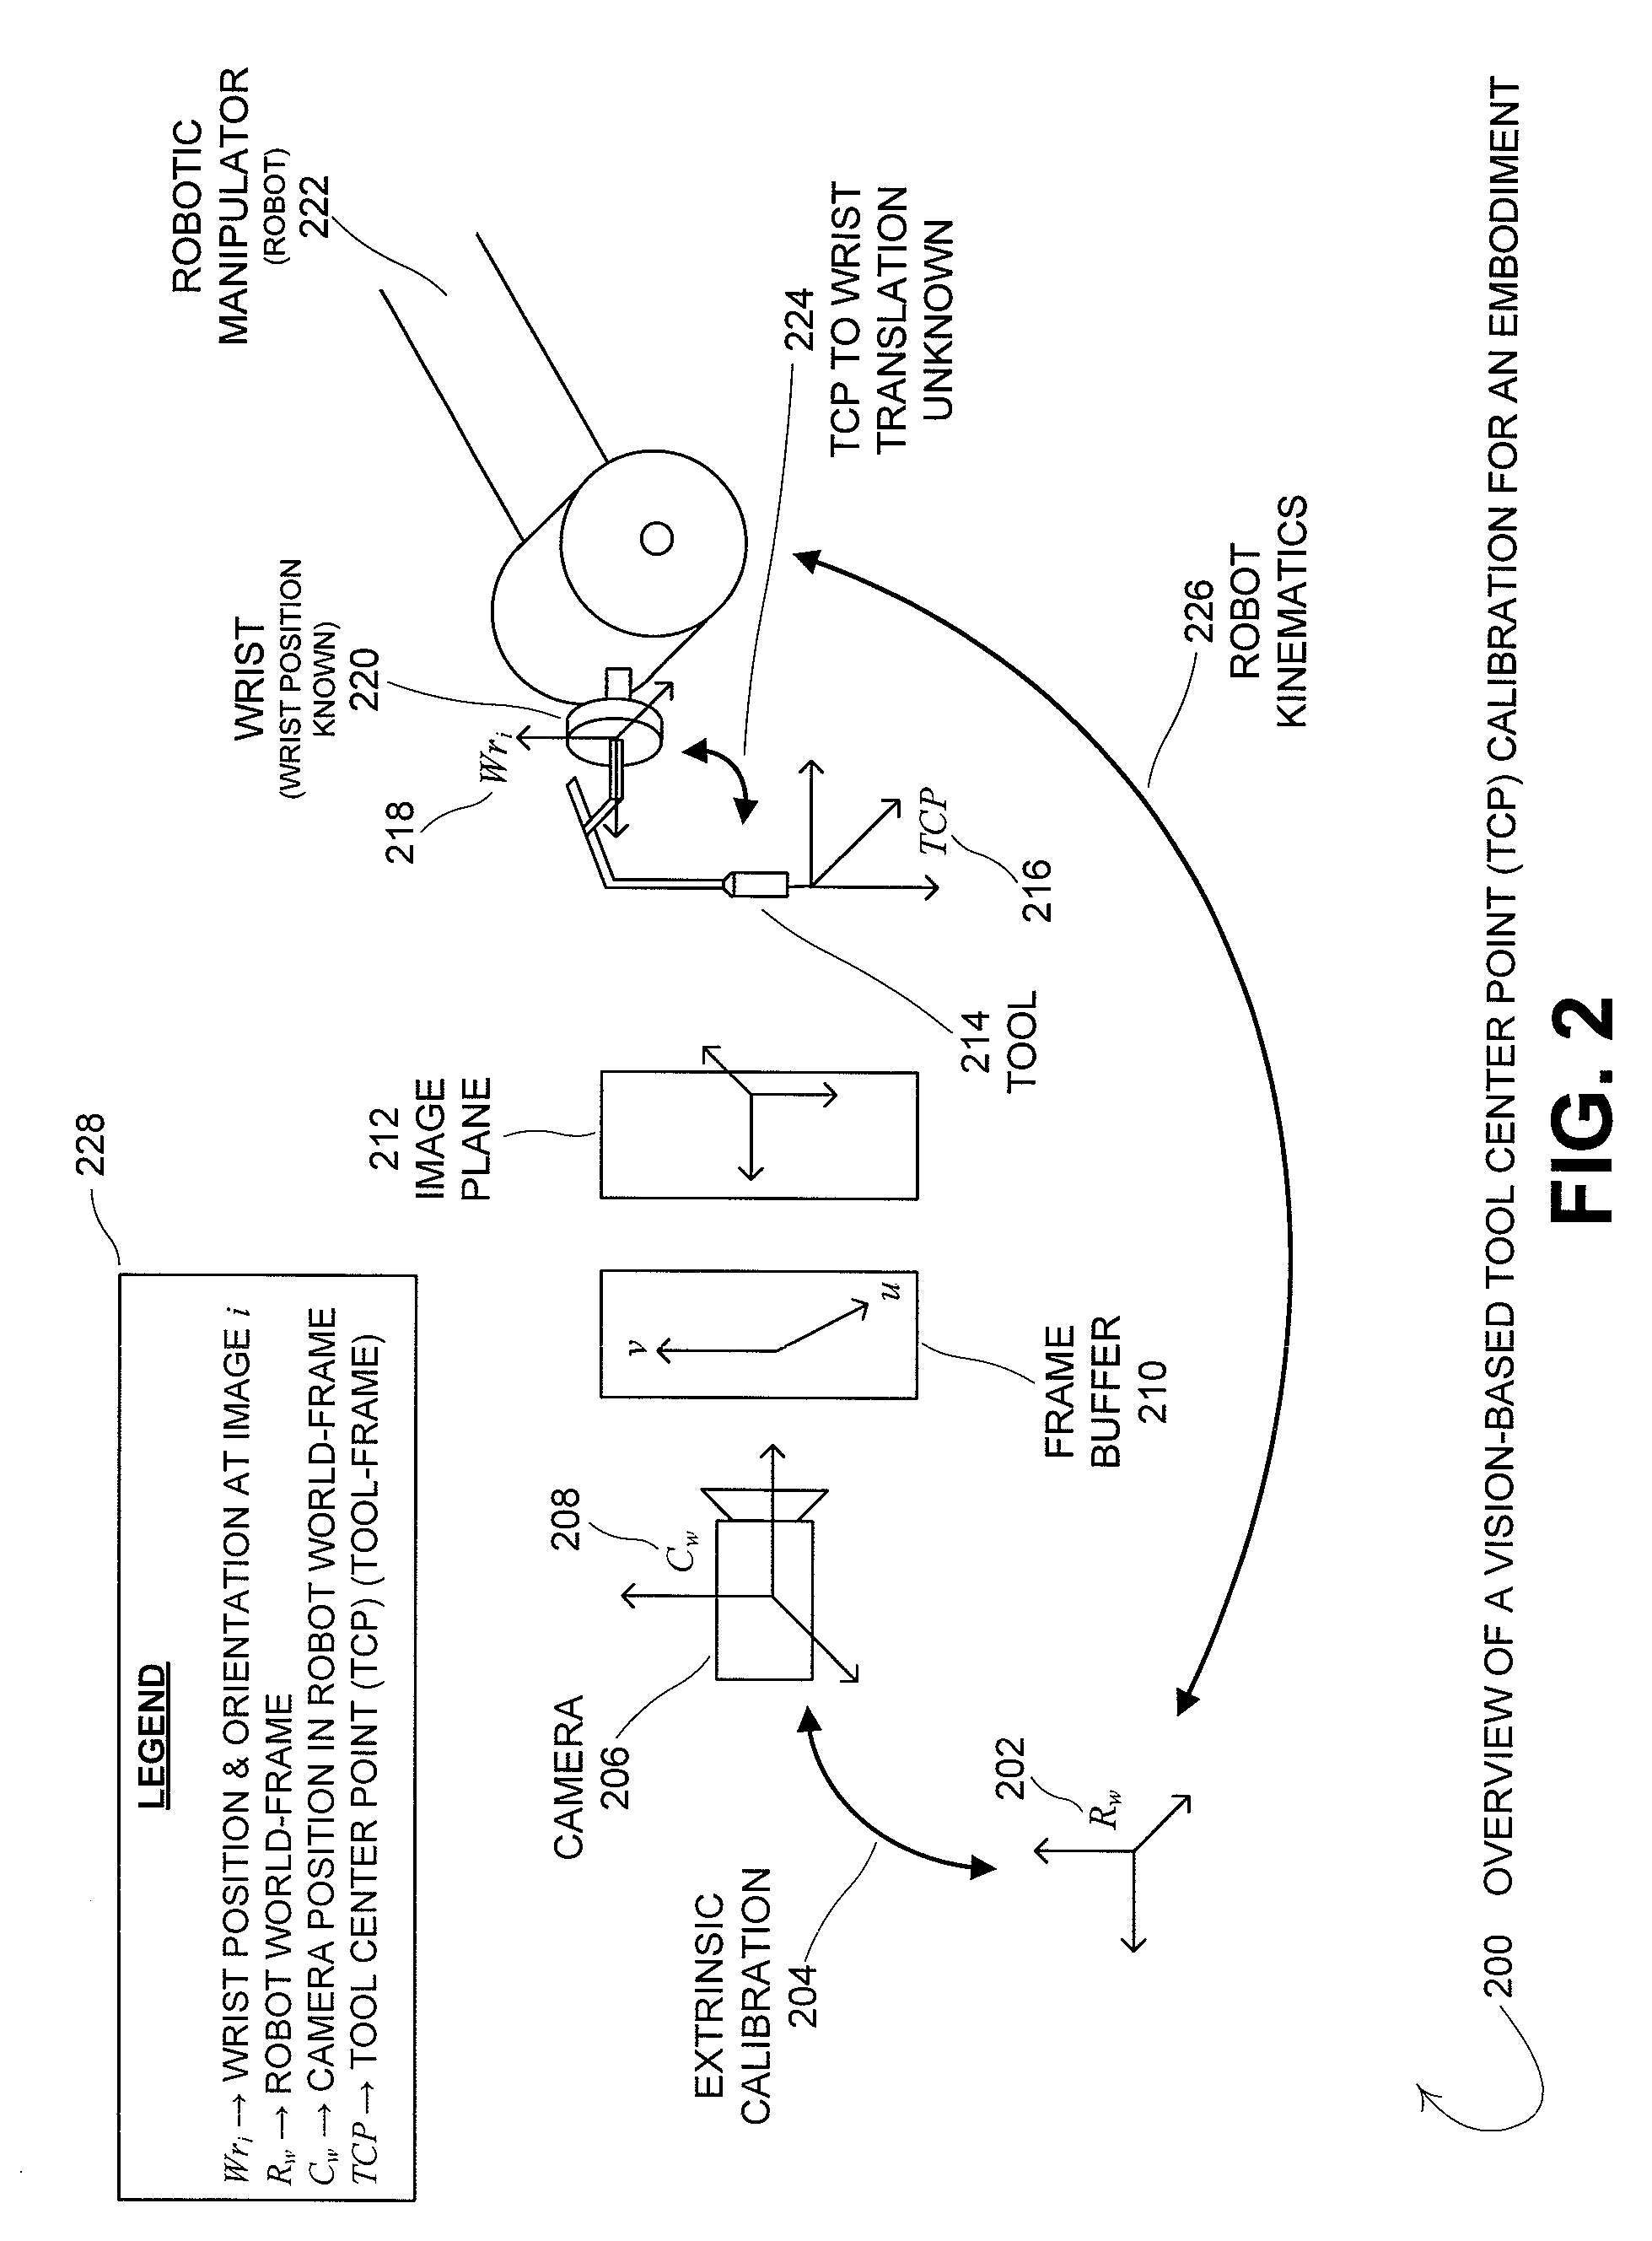 Method and system for finding a tool center point for a robot using an external camera